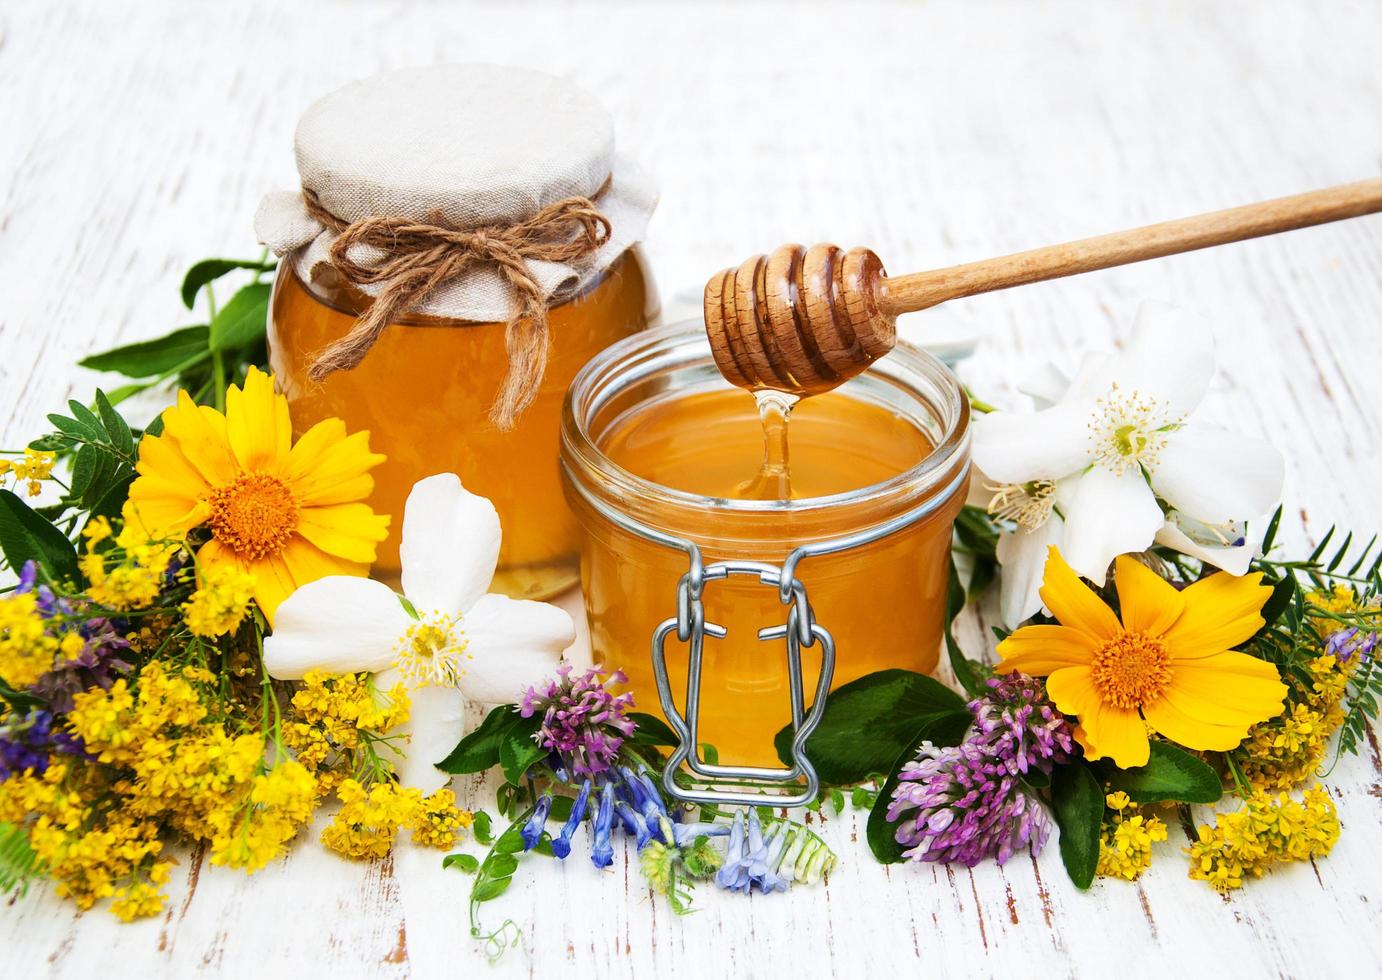 Honey and wild flowers on a wooden background photo